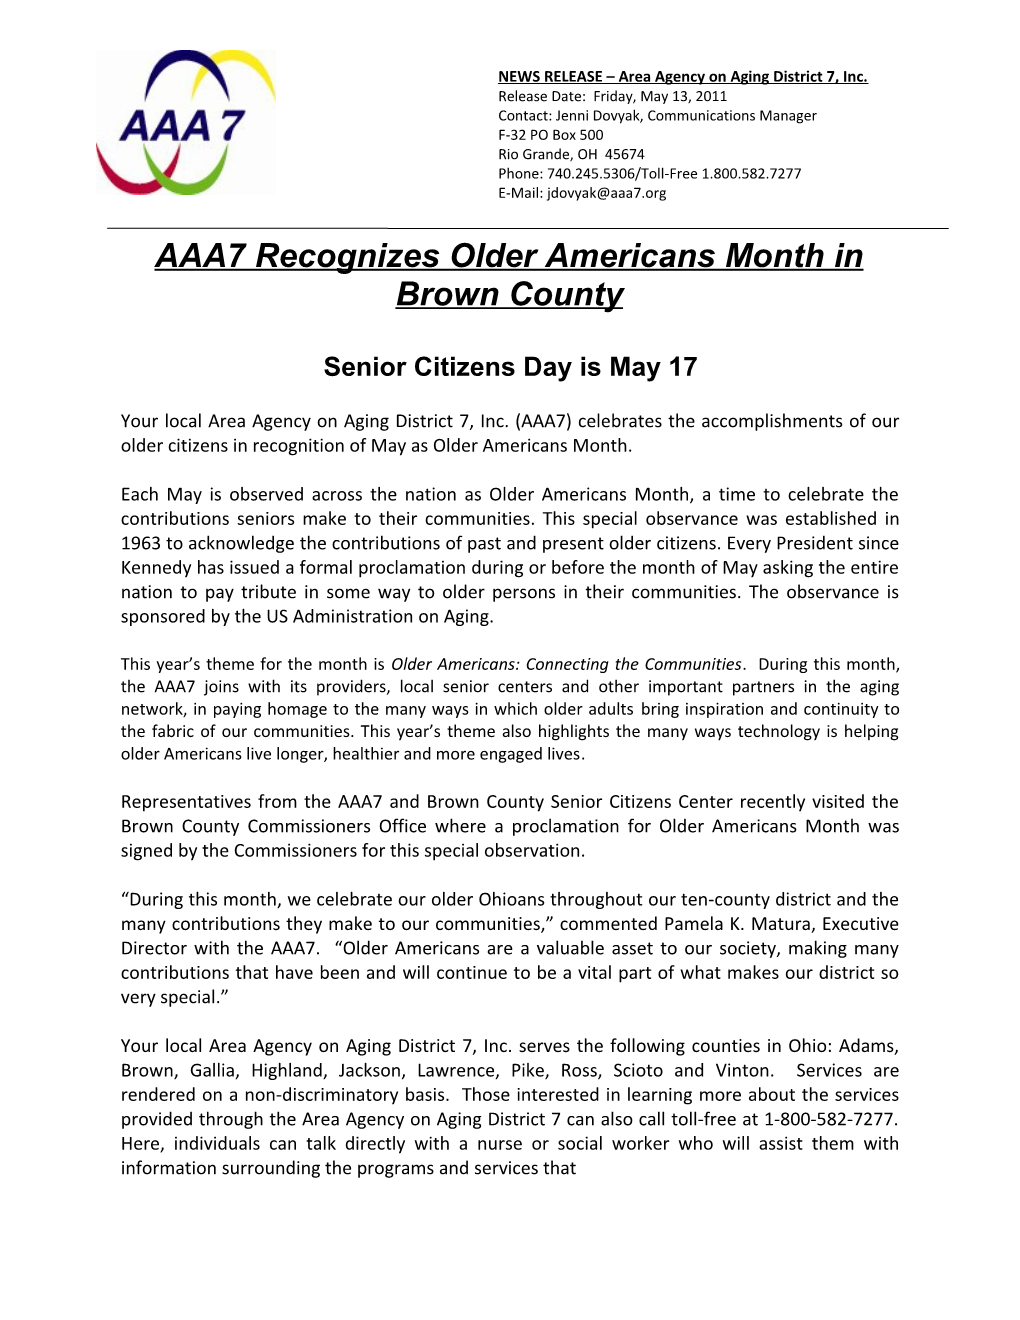 Senior Citizens Day Is May 17